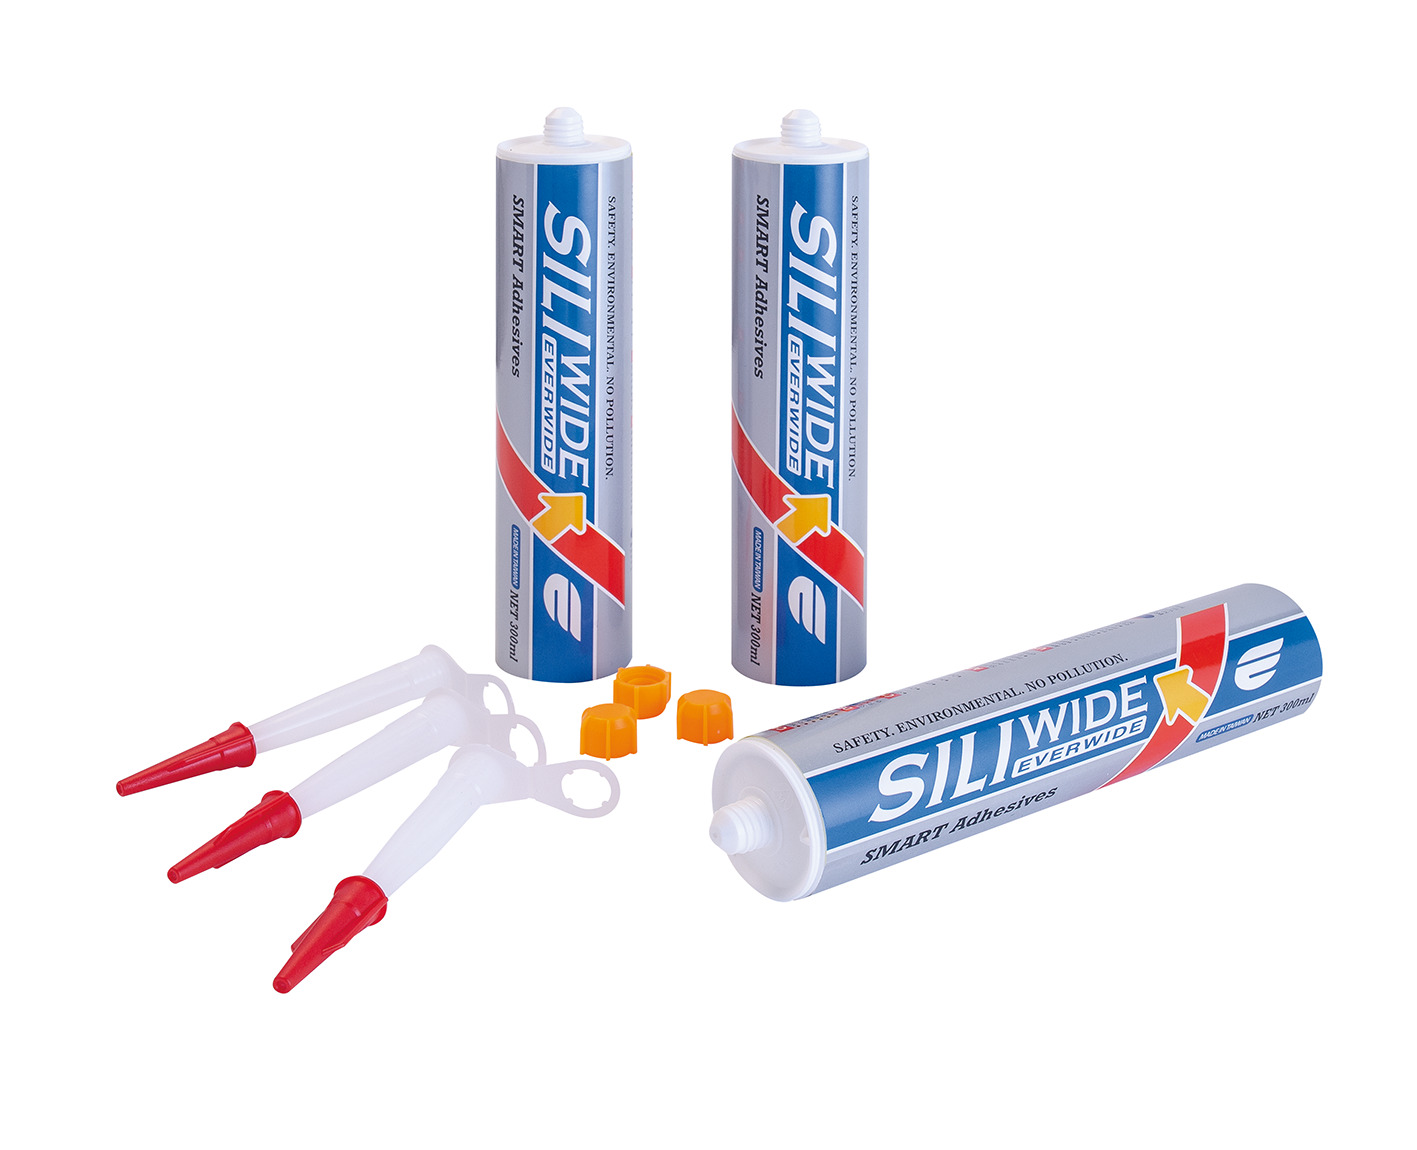 Modified Silicone Adhesives - High Strength Sealant - Flexible and tough  adhesive